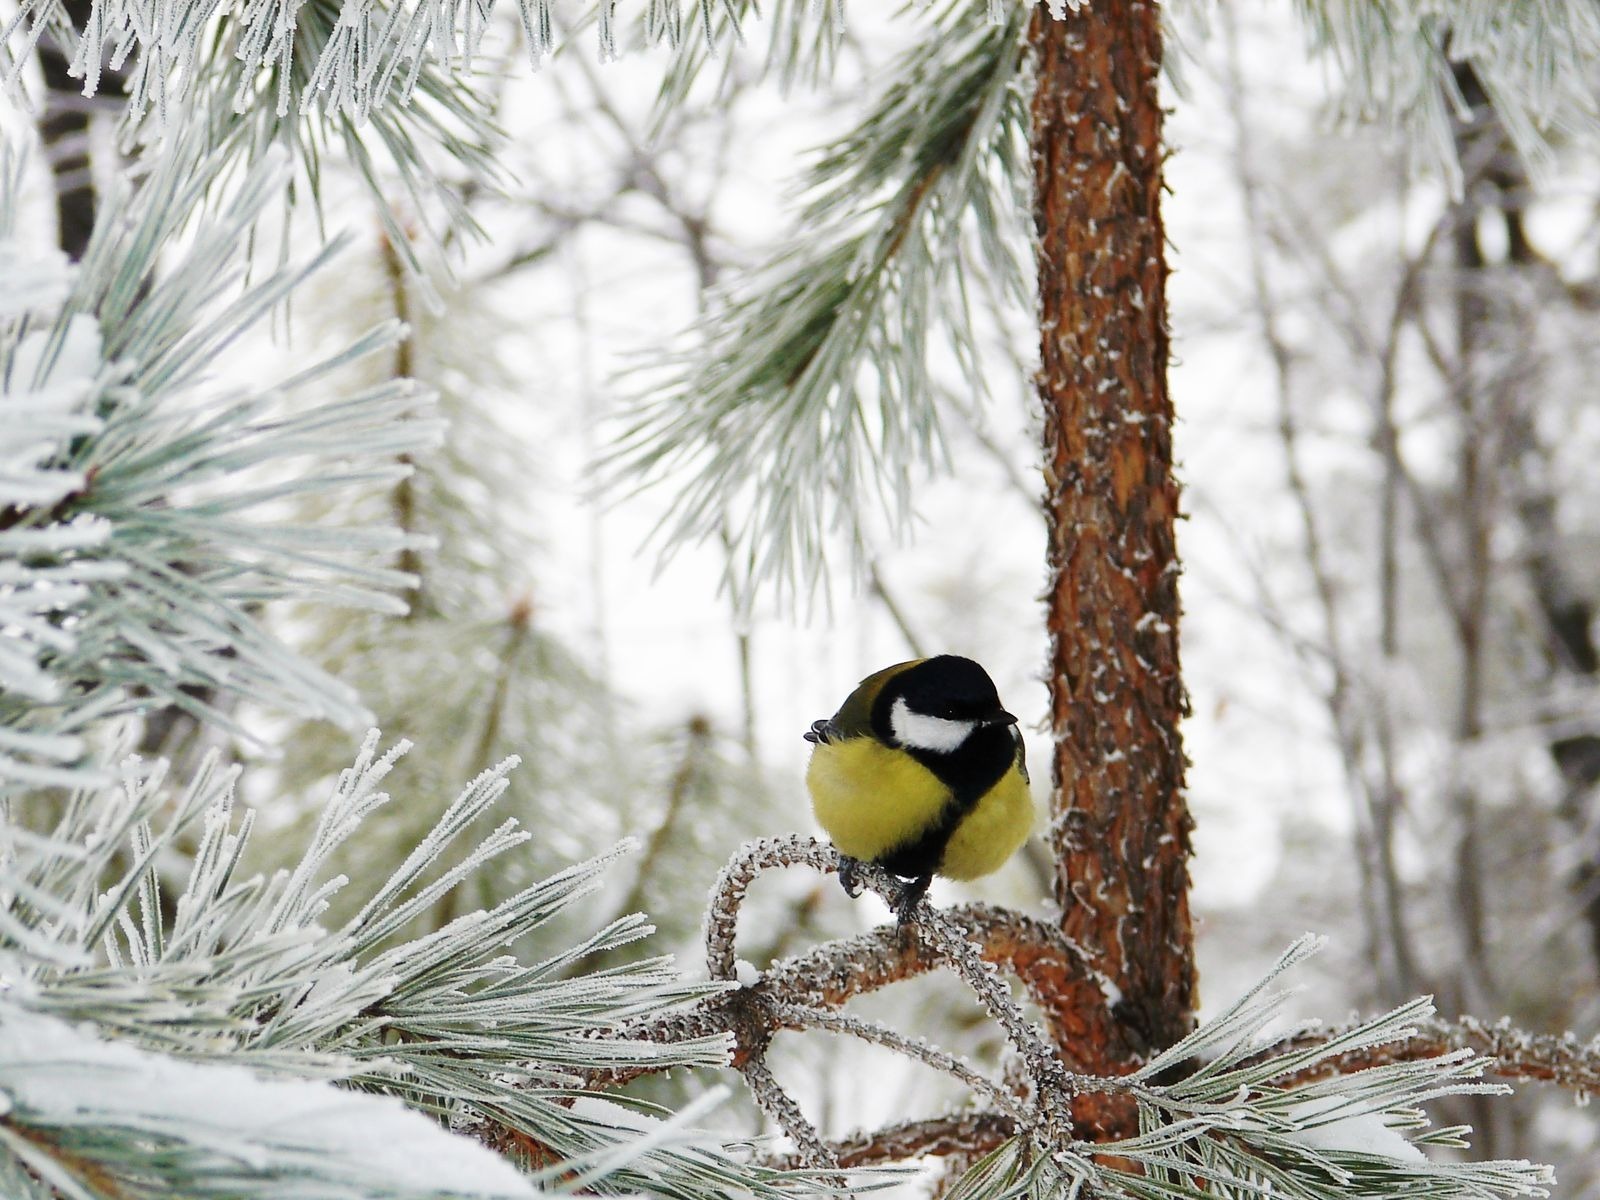 Photos of tits in winter